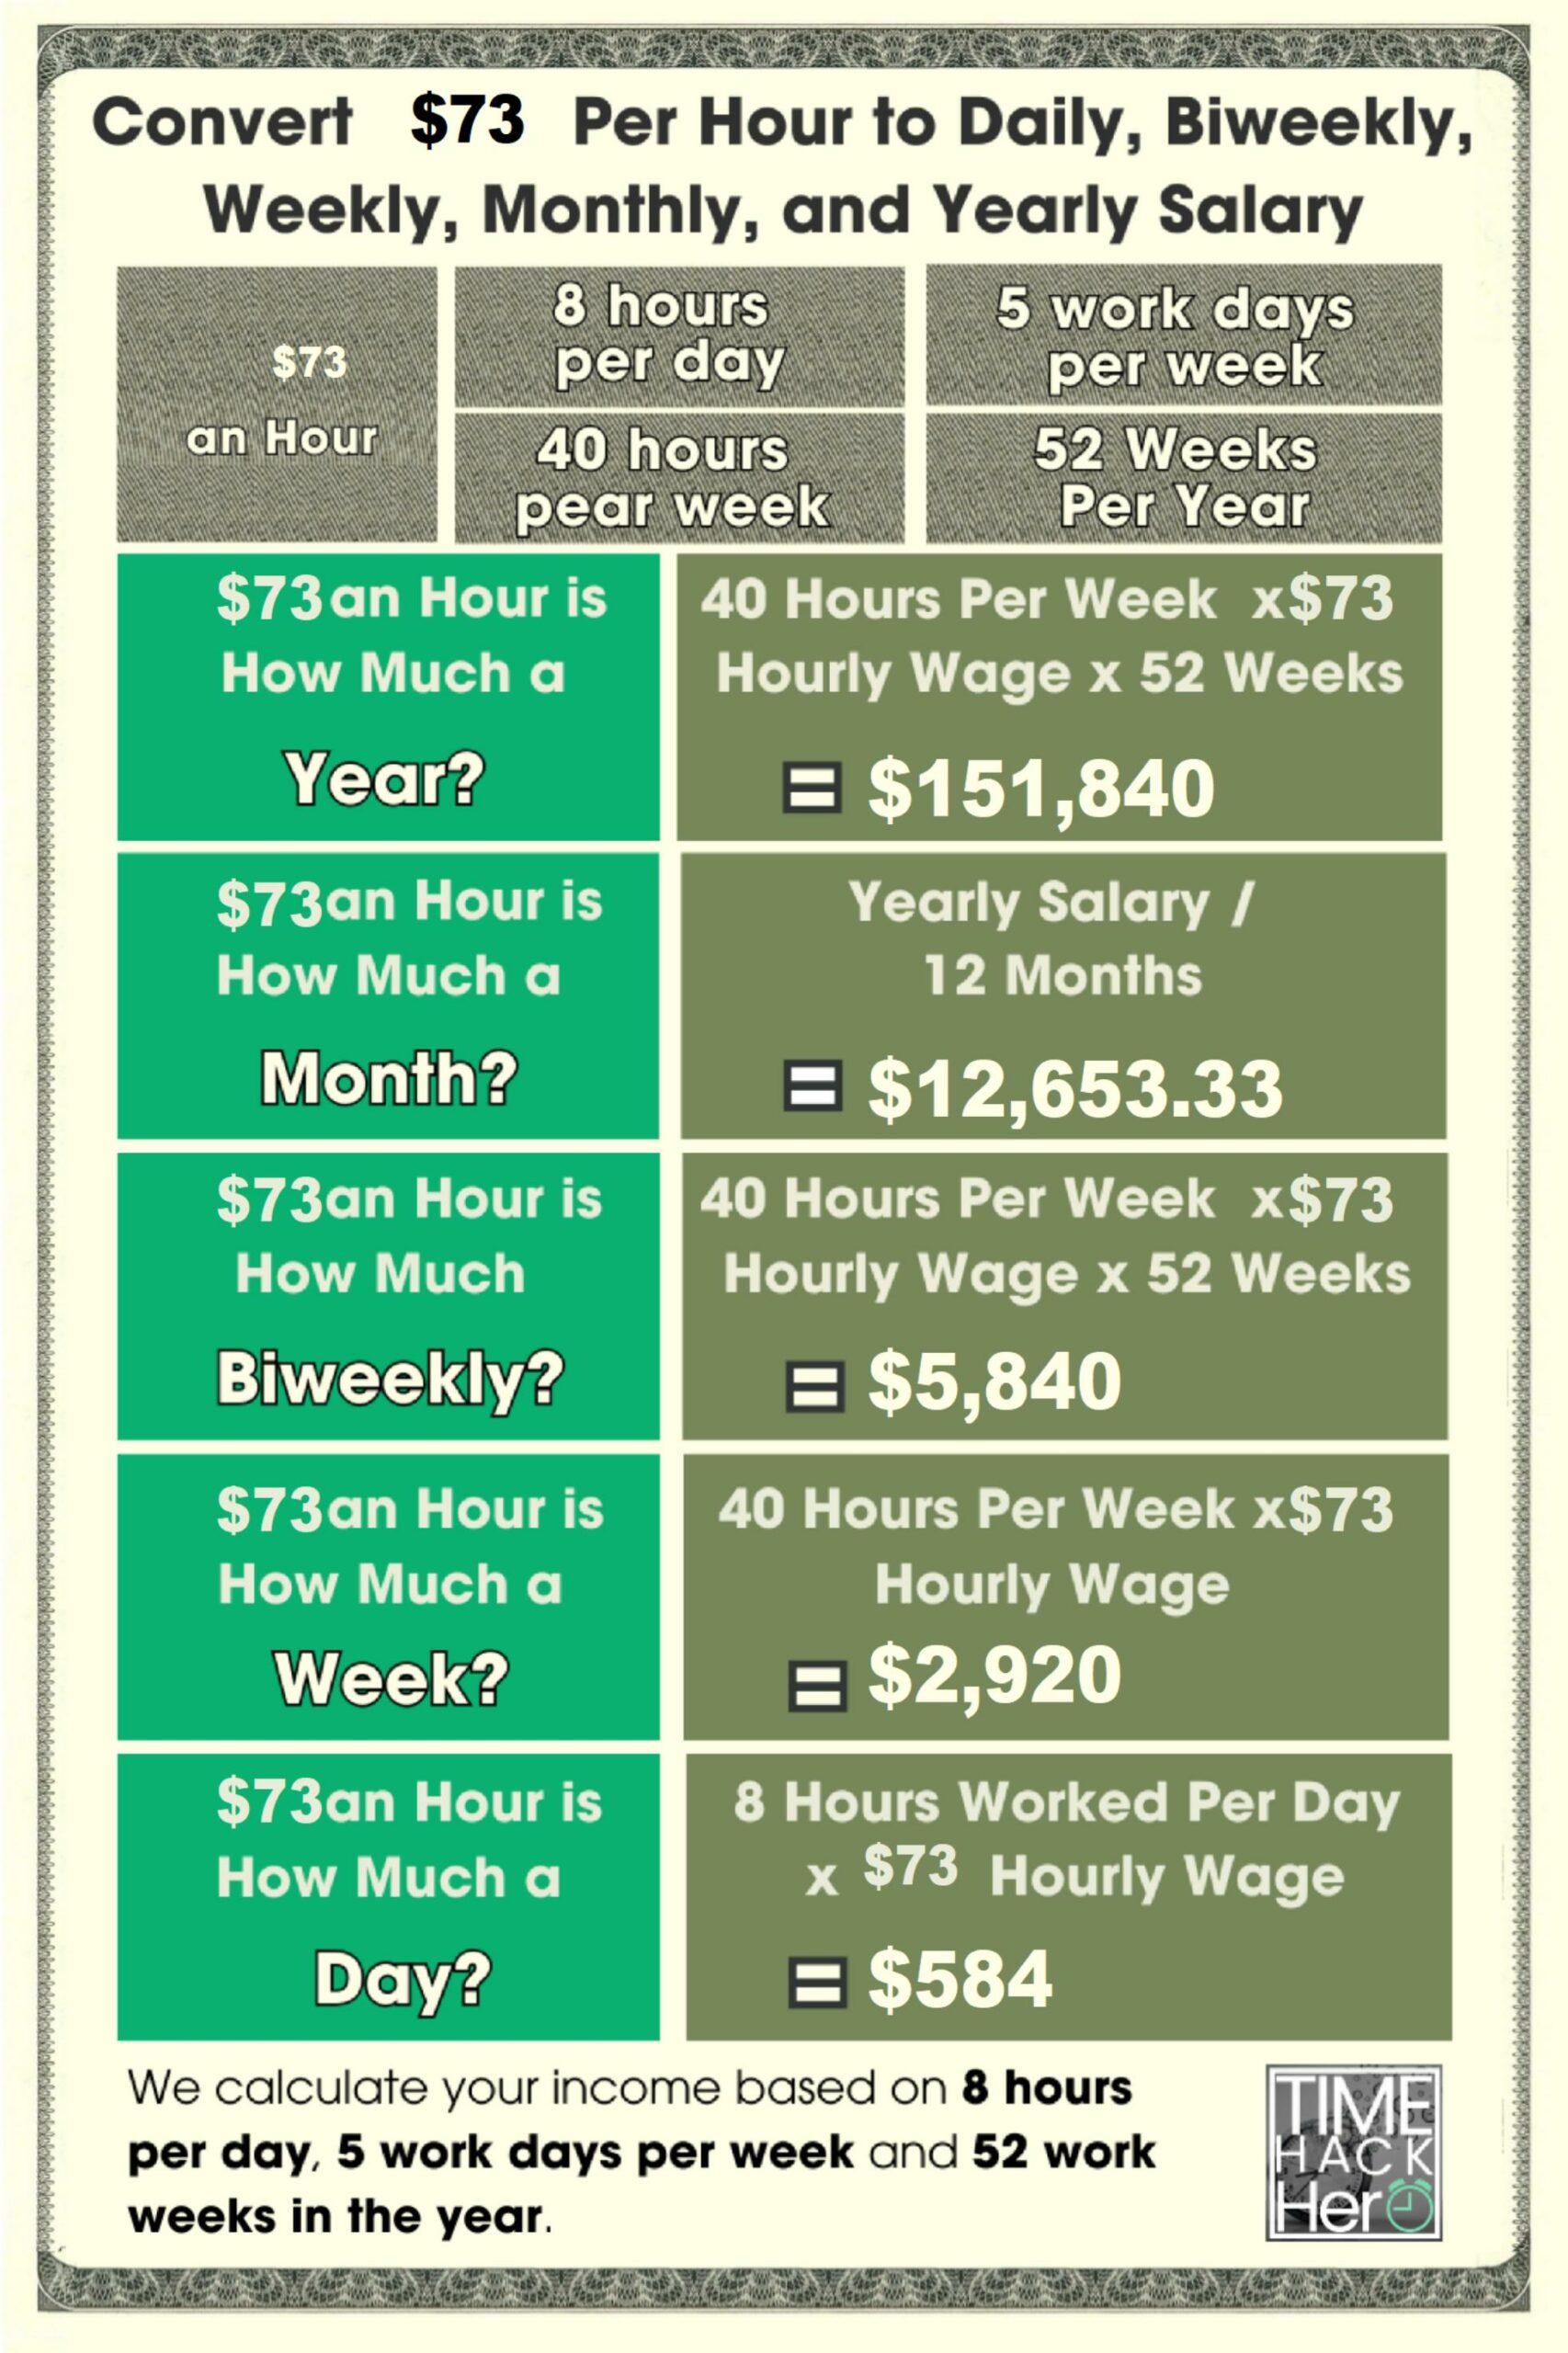 Convert $73 Per Hour to Weekly, Monthly, and Yearly Salary